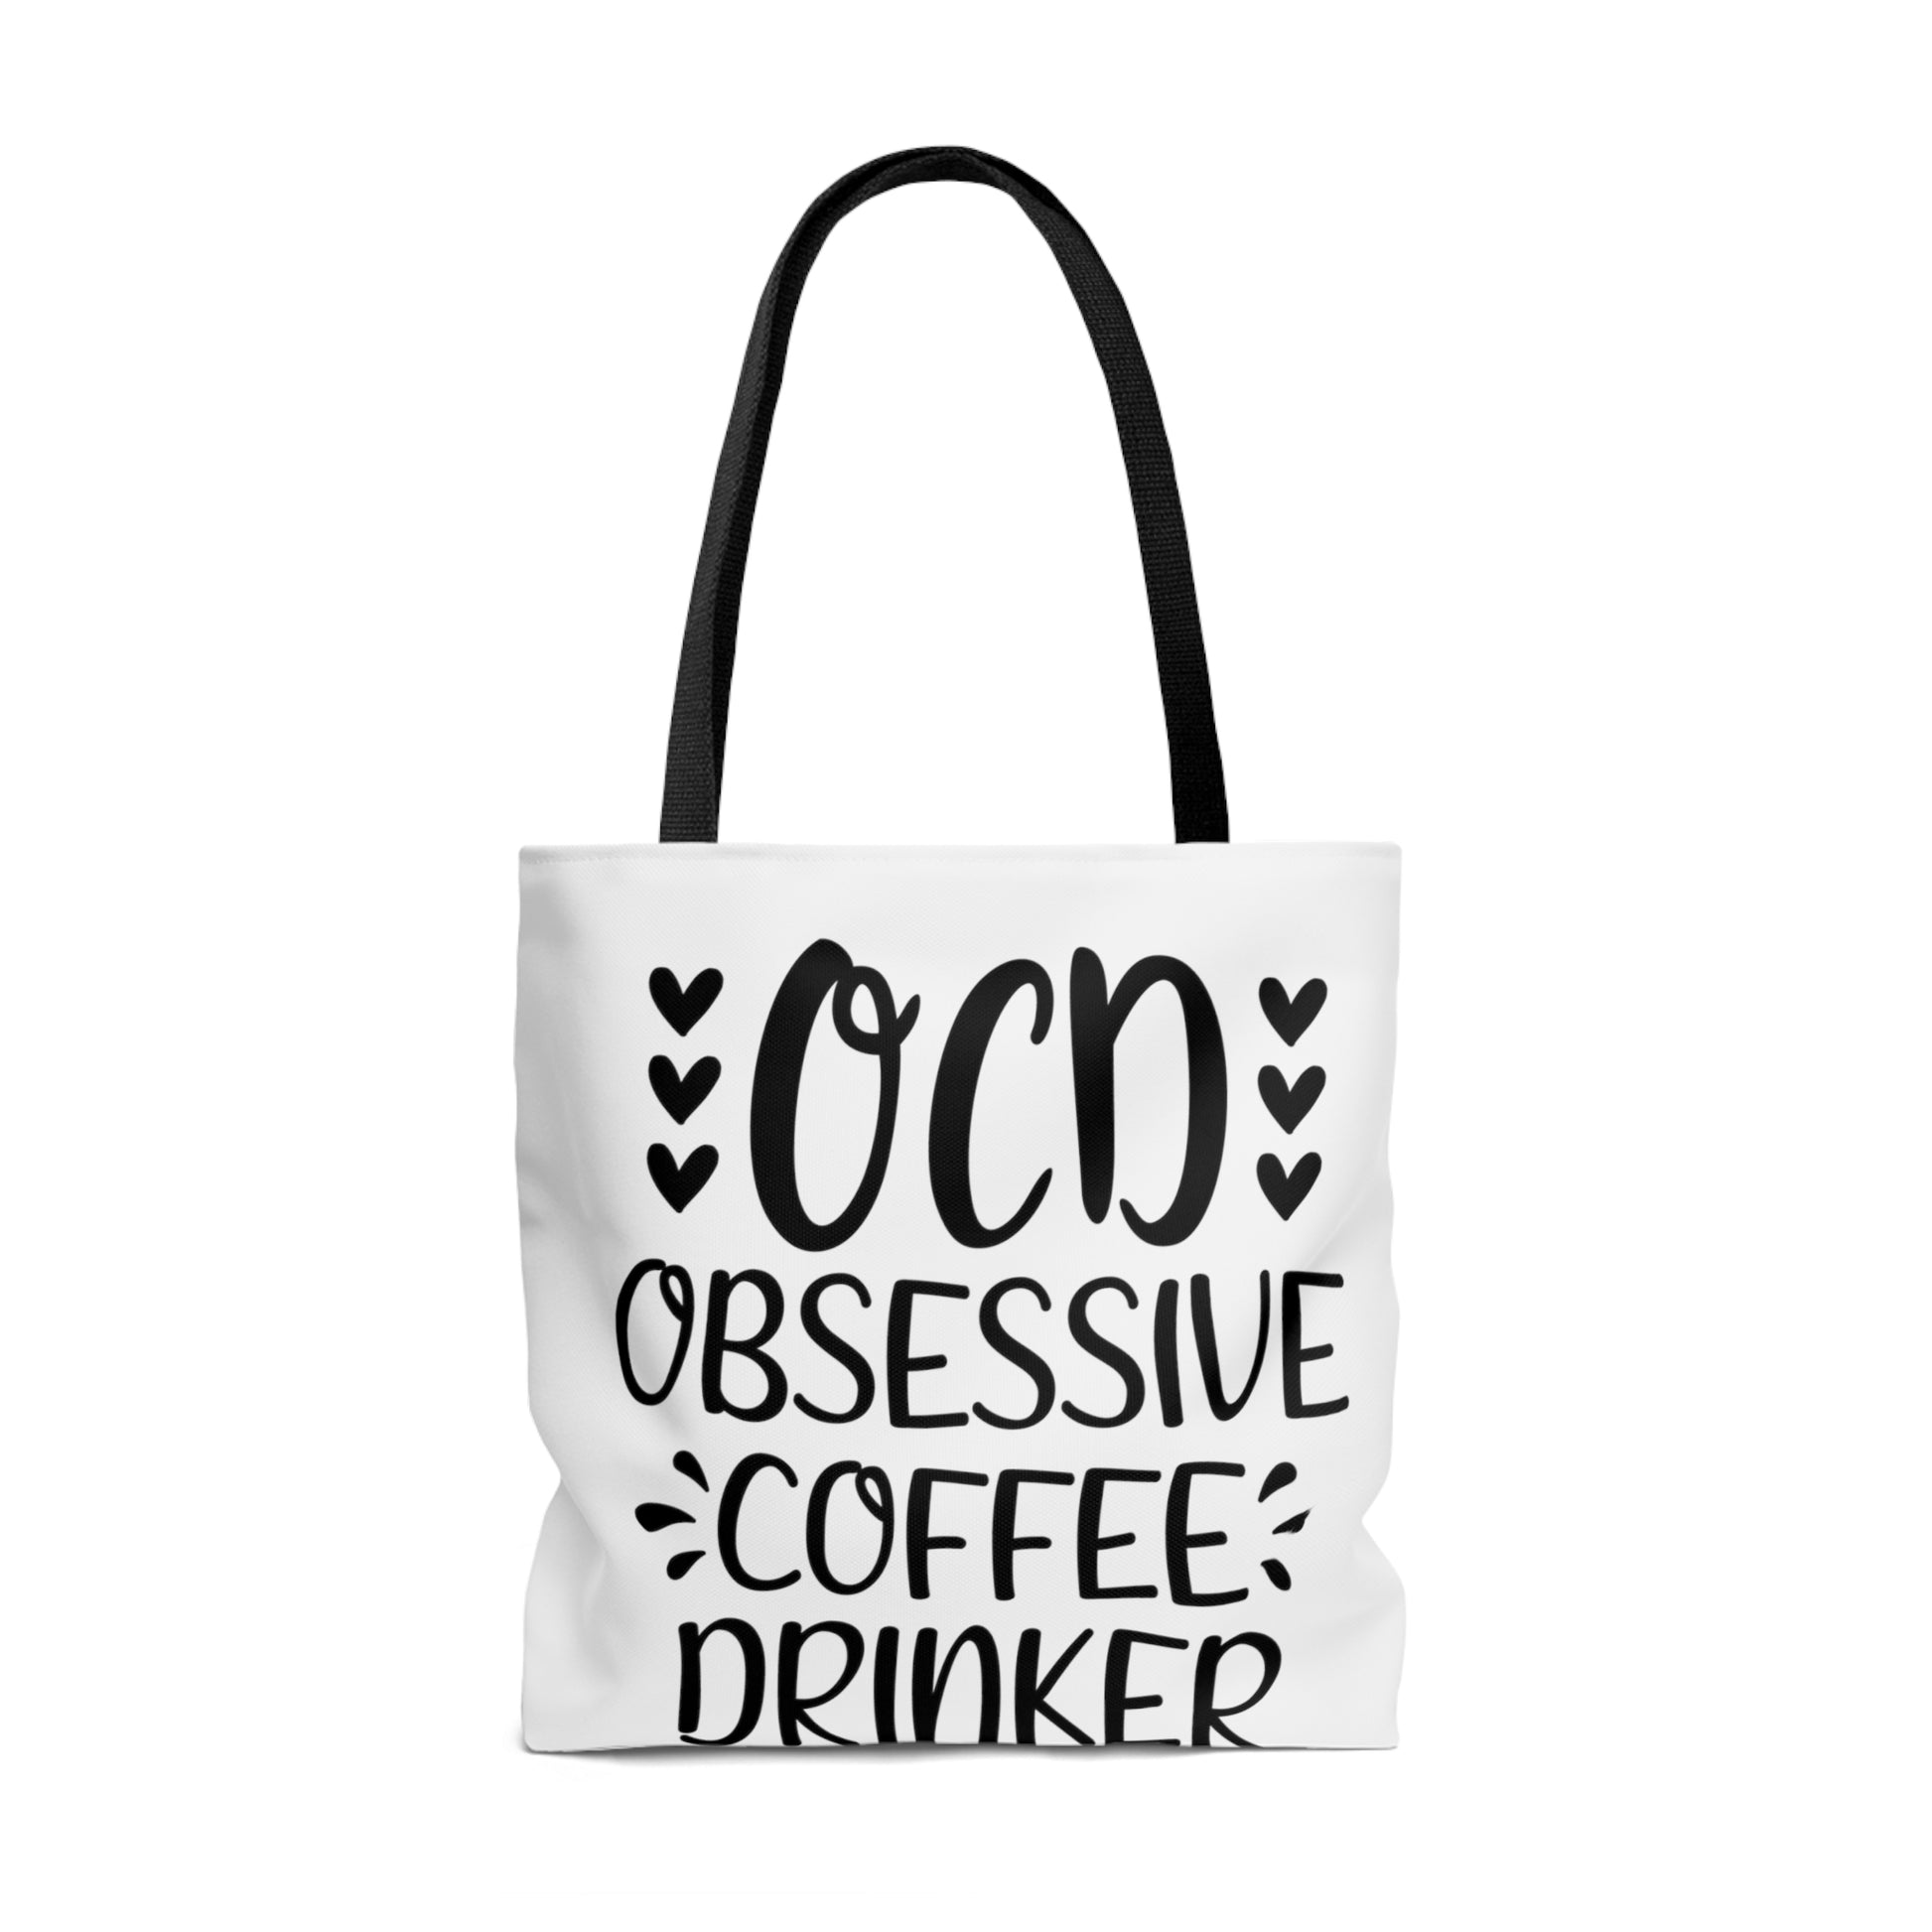 Tote Bag All Over Print Coffee Quote - Natalie's Gourmet Coffee and Tees